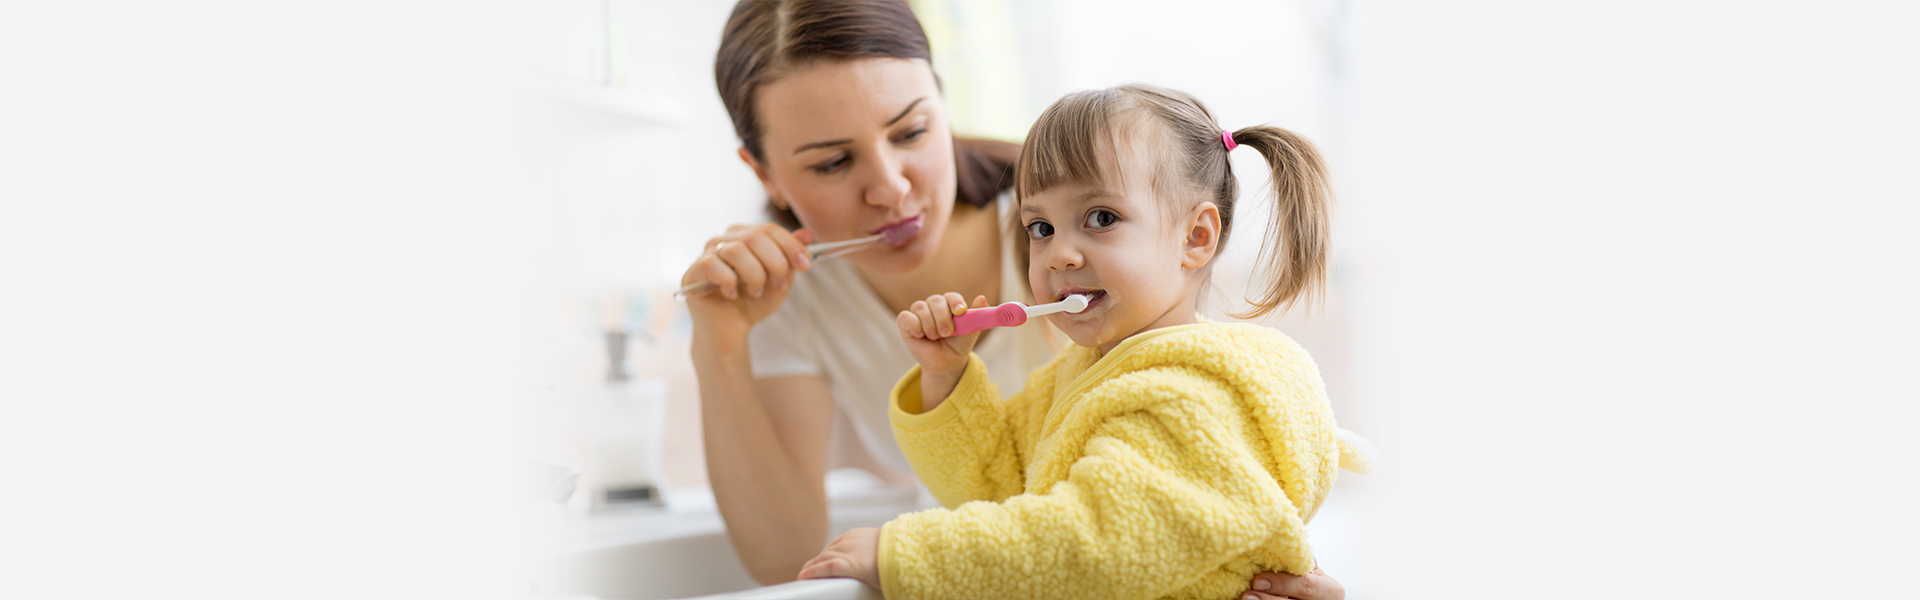 Why Search a Top-Rated Pediatric Dentist Near Me?